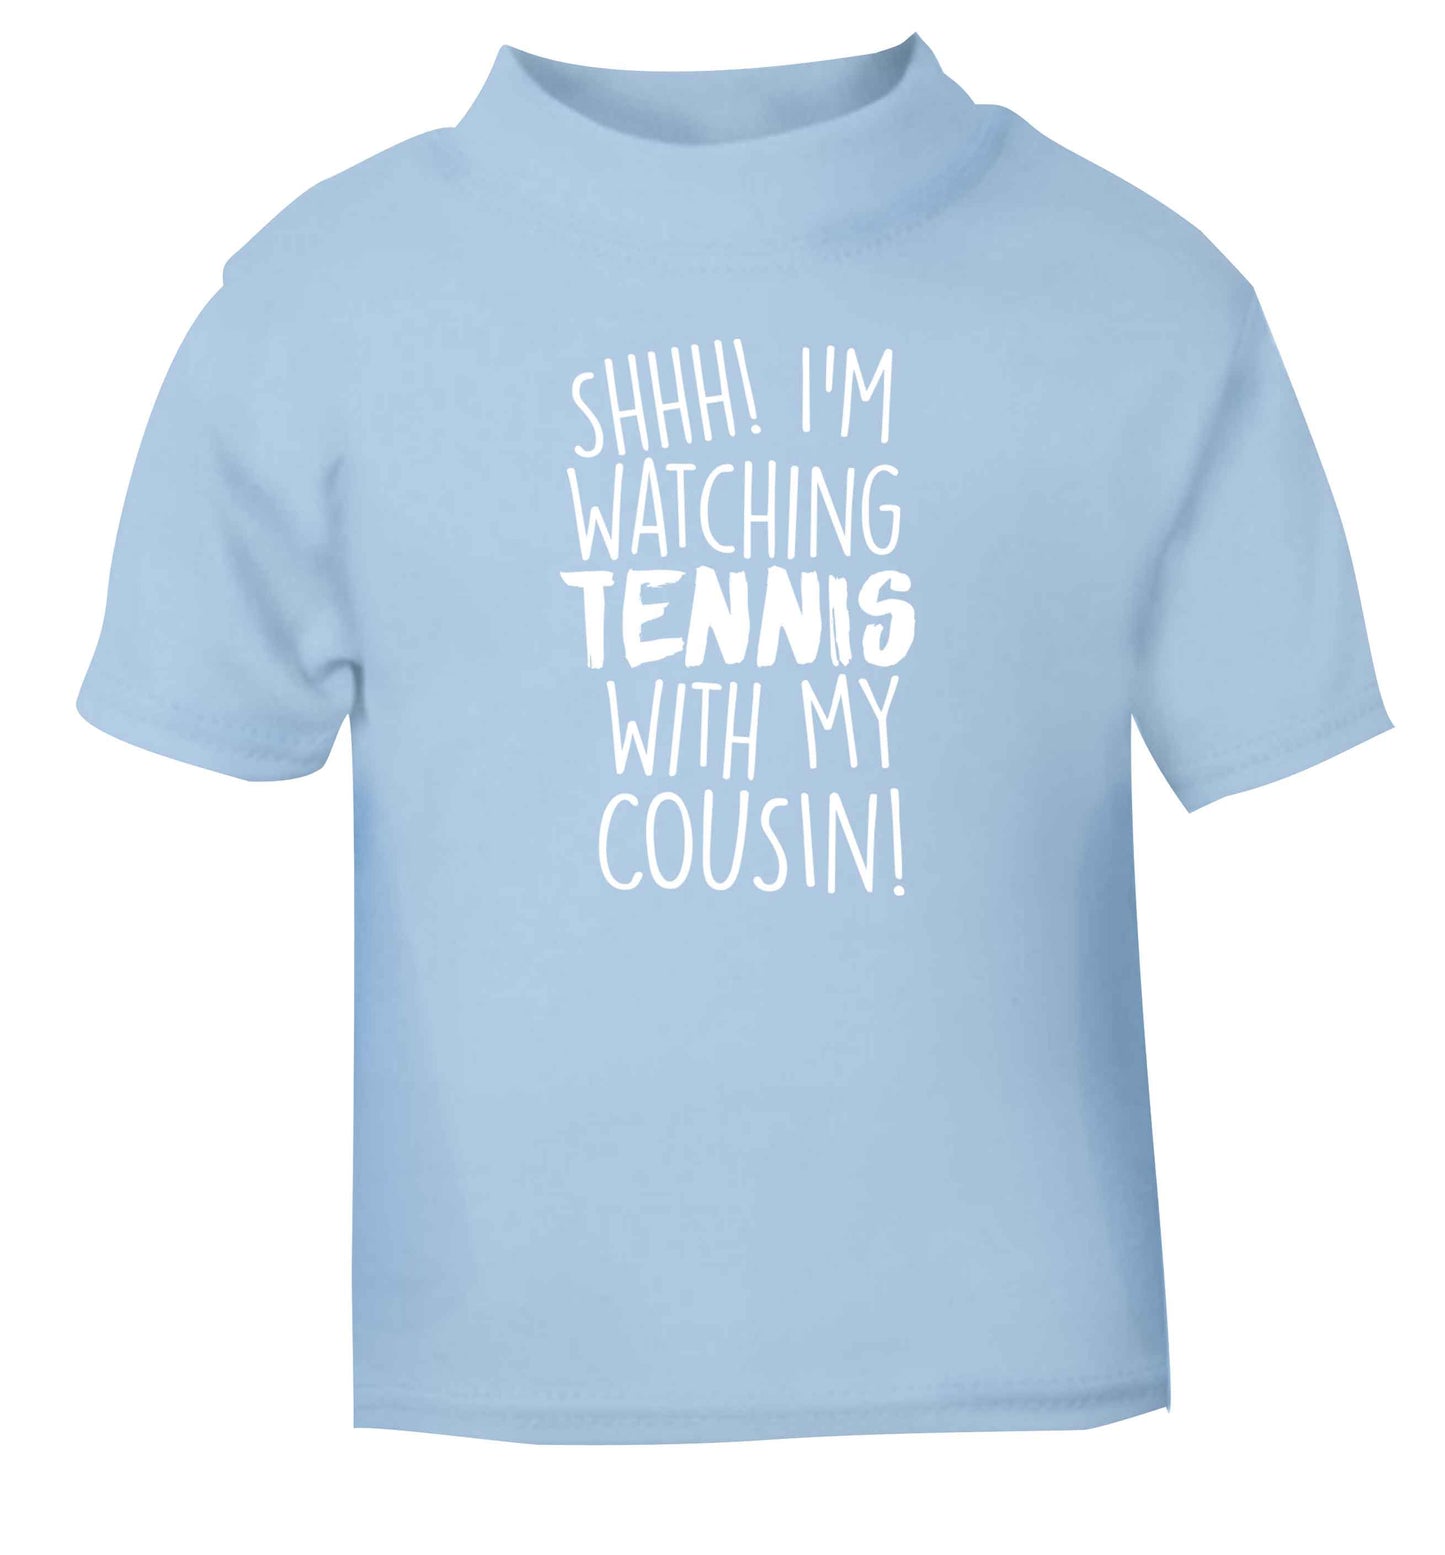 Shh! I'm watching tennis with my cousin! light blue Baby Toddler Tshirt 2 Years